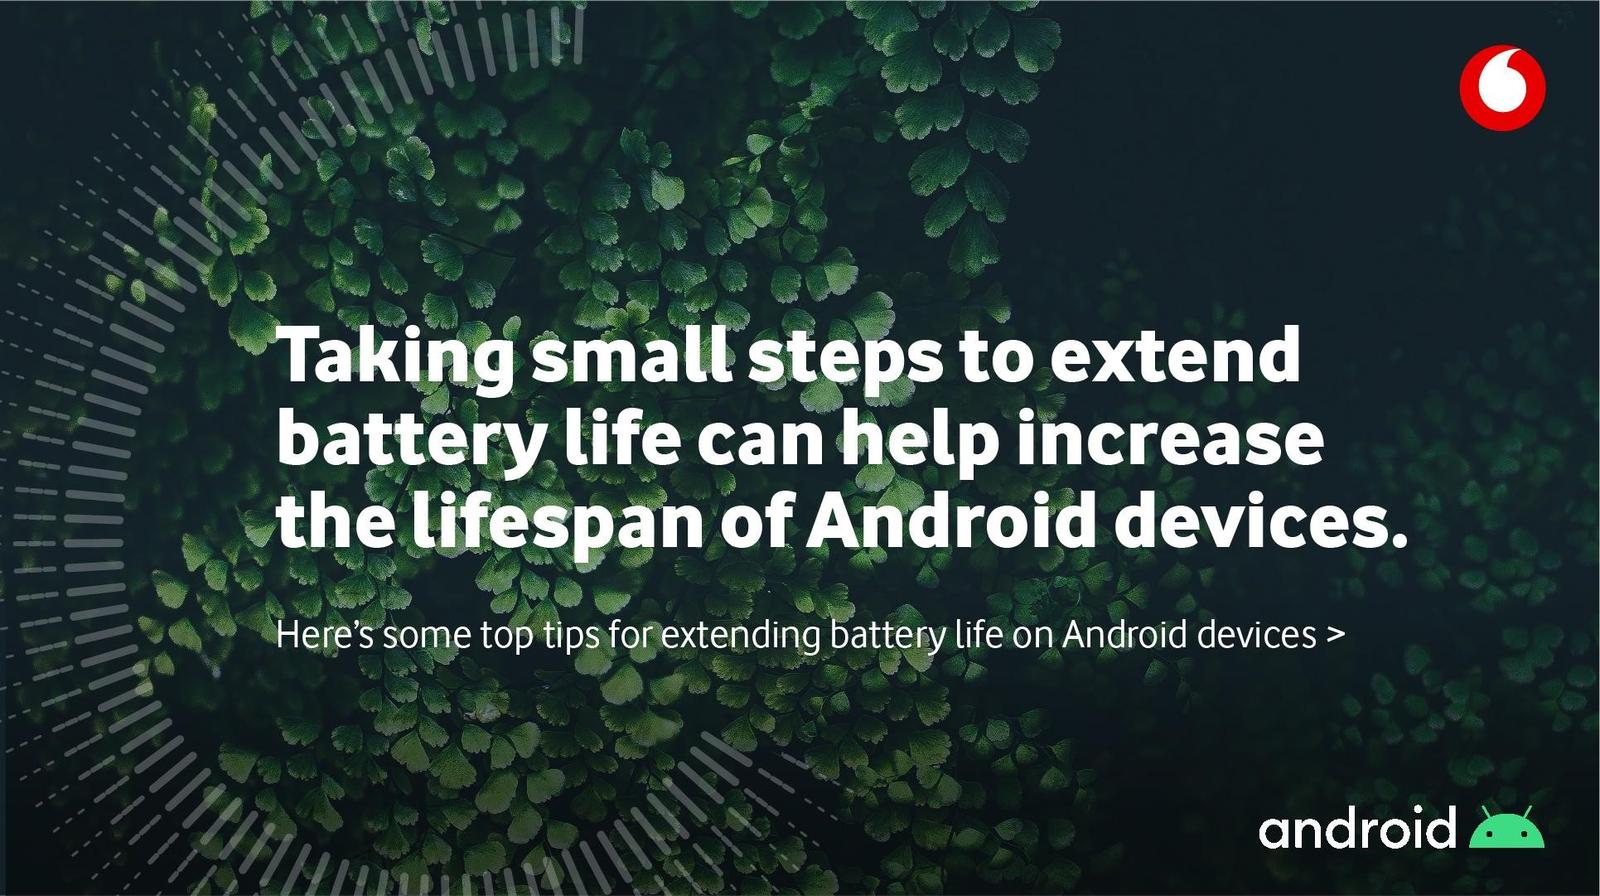 Here are some simple features you can activate to help extend Android battery life